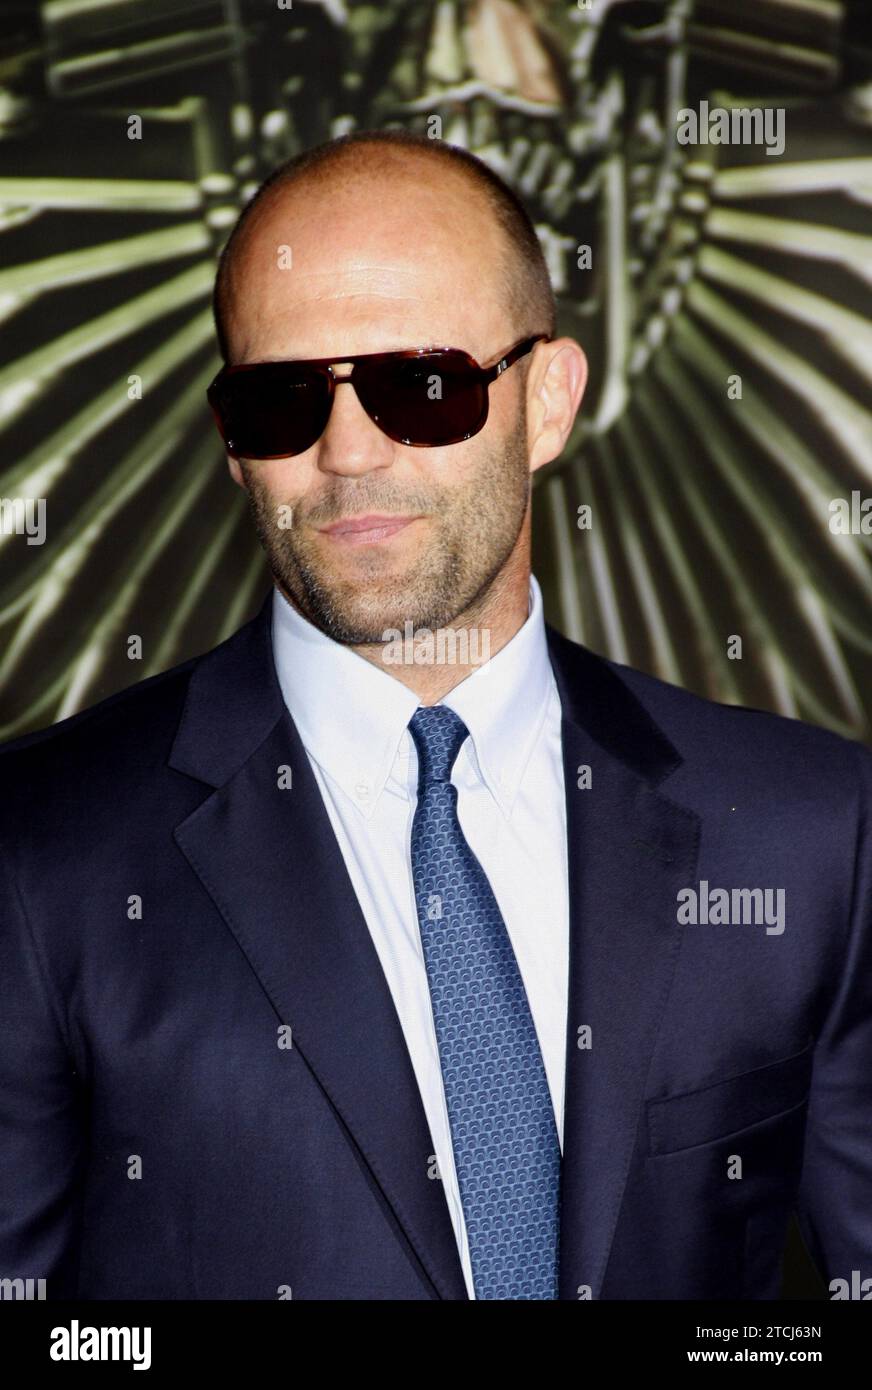 Jason Statham at the Los Angeles premiere of 'The Expendables 2' held at the Grauman's Chinese Theatre in Hollywood on August 15, 2012. Credit: Stock Photo